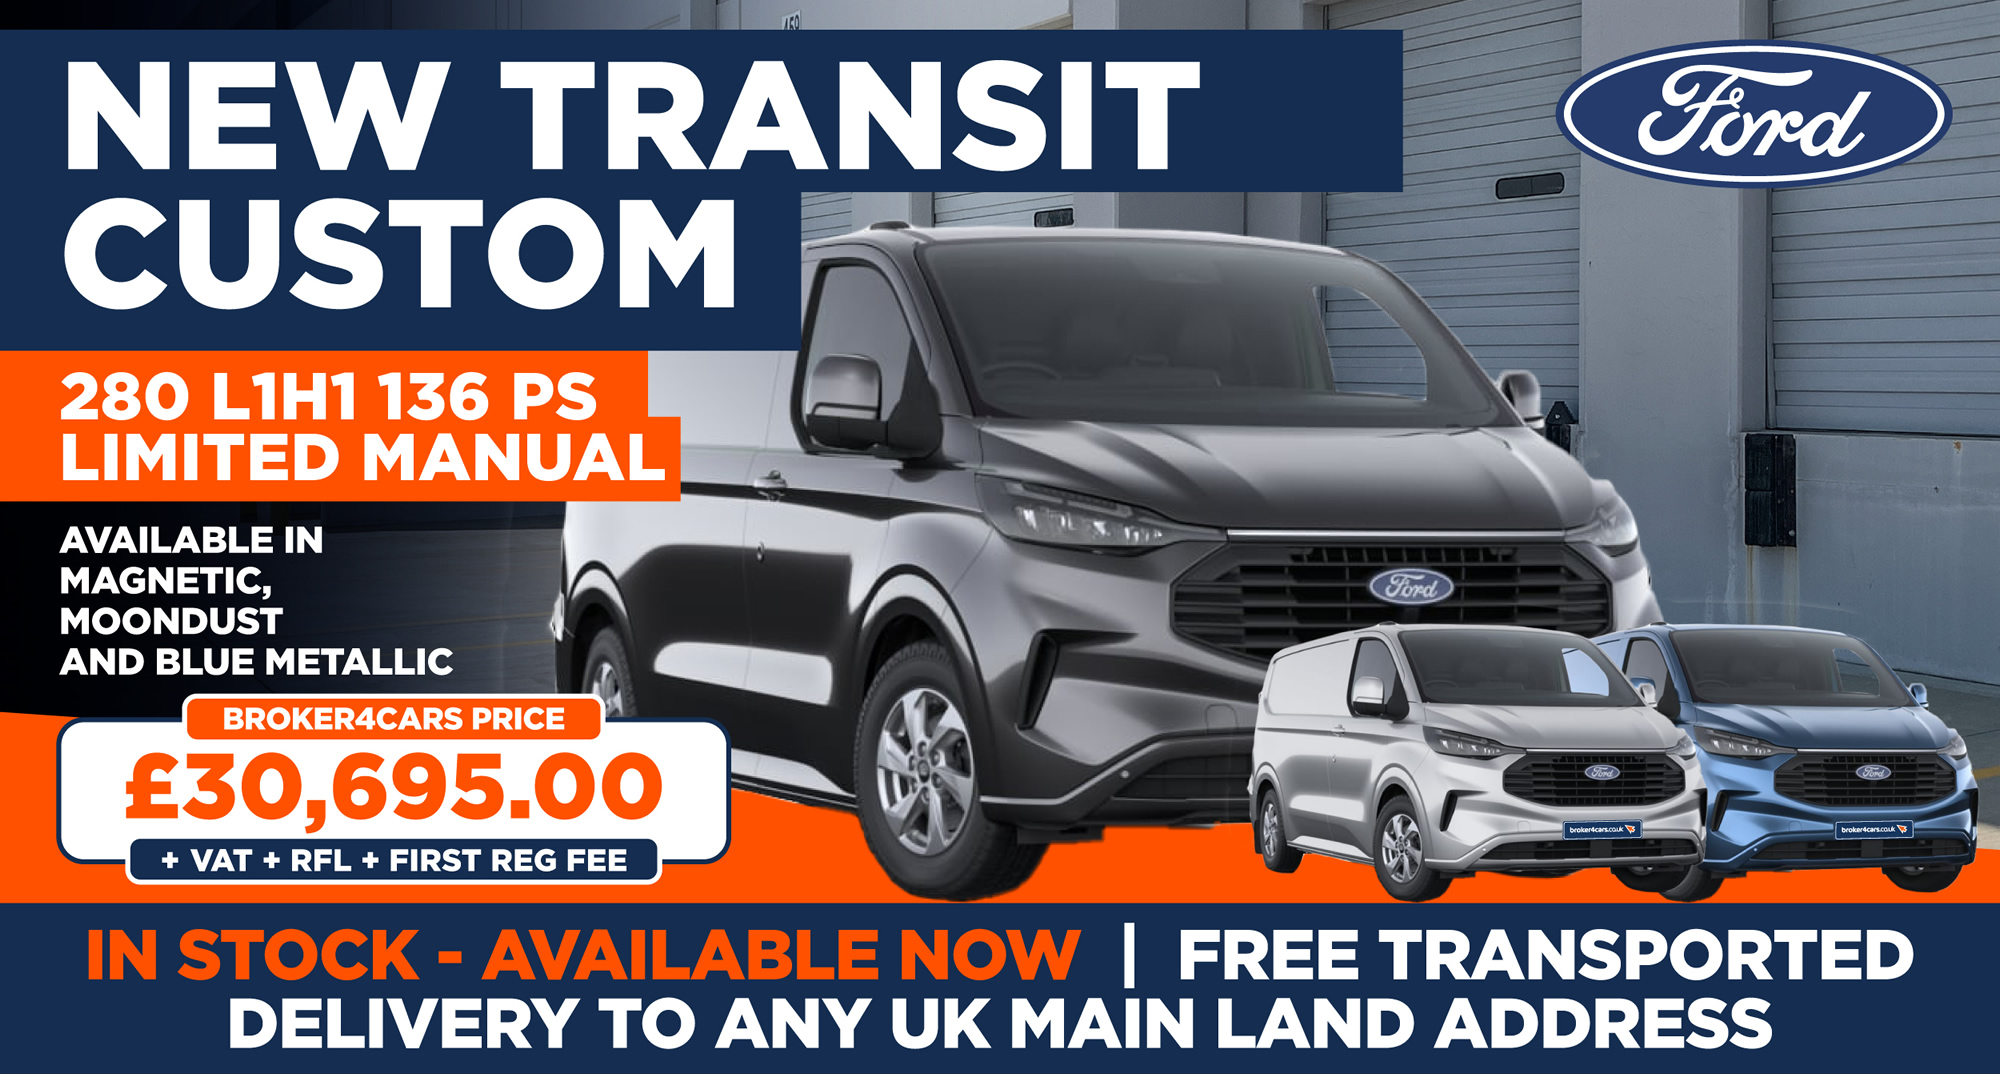 New Transit Custom 280 L1H1 136 PS Limited ManualAvailable in Magnetic, Moondust and Blue Metallic, In stock - Available now. Free Transported Delivery to any UK Mainland Address